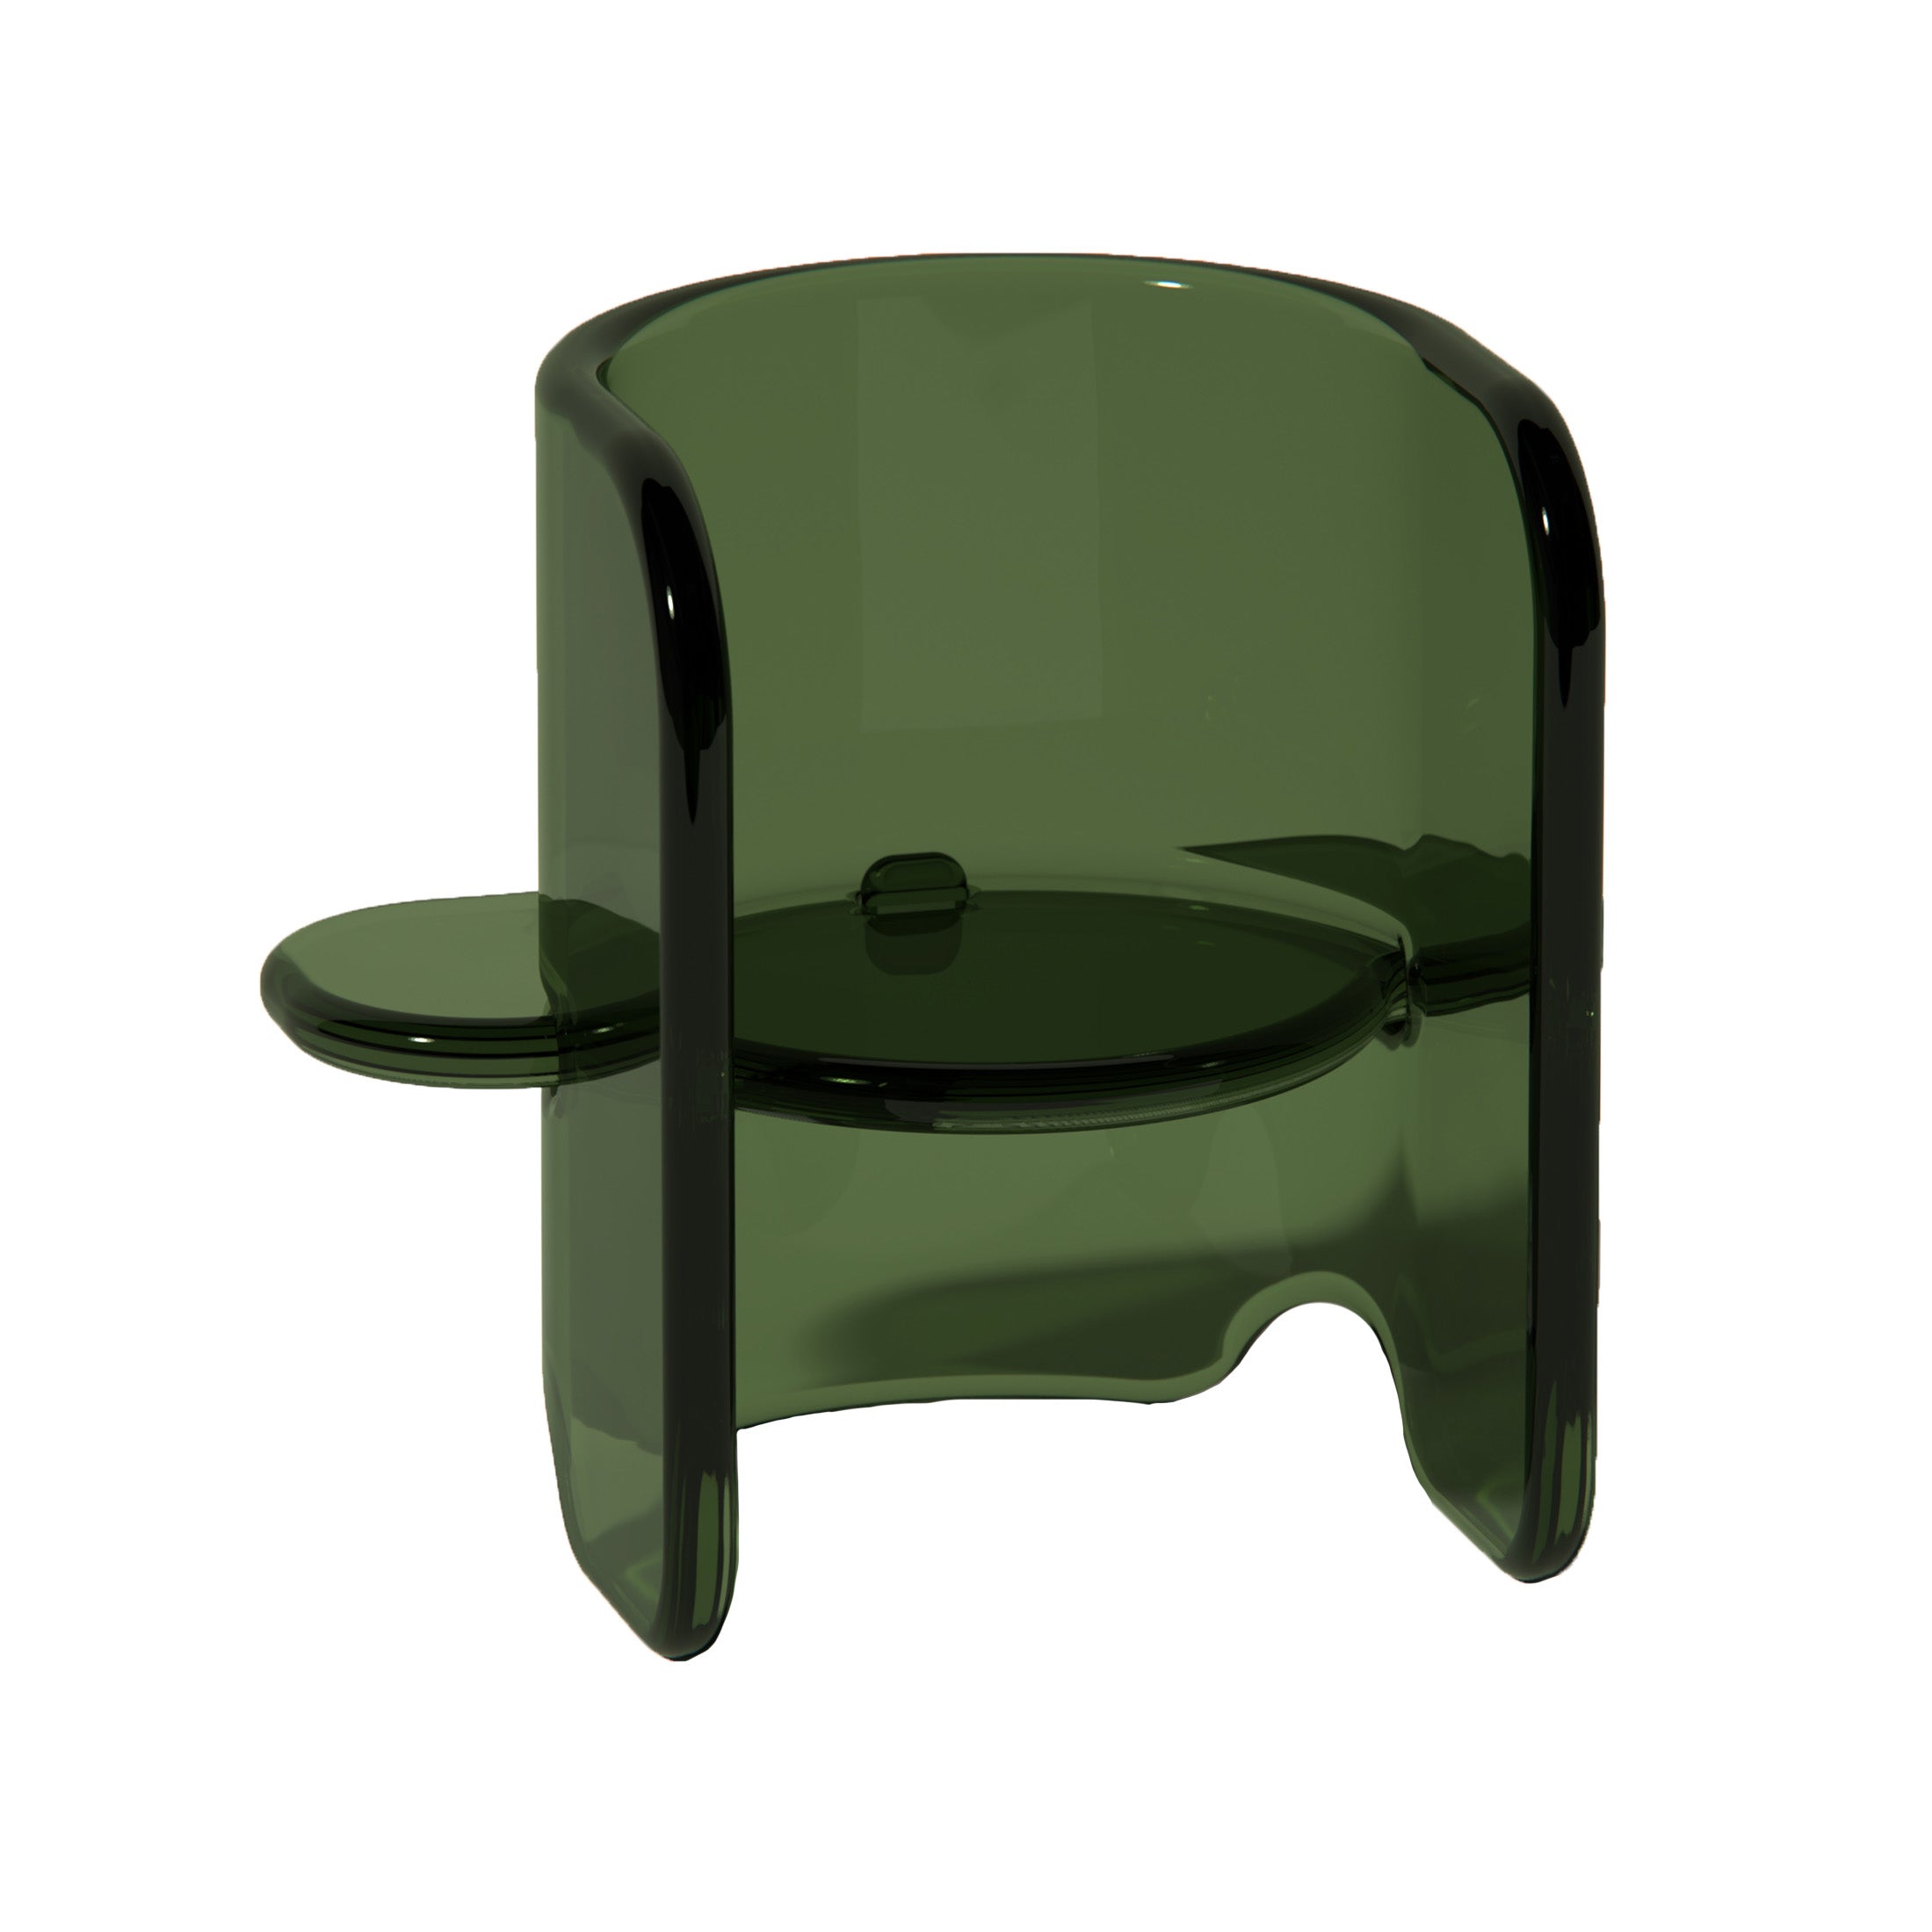 Plump Chair in Deep Olive